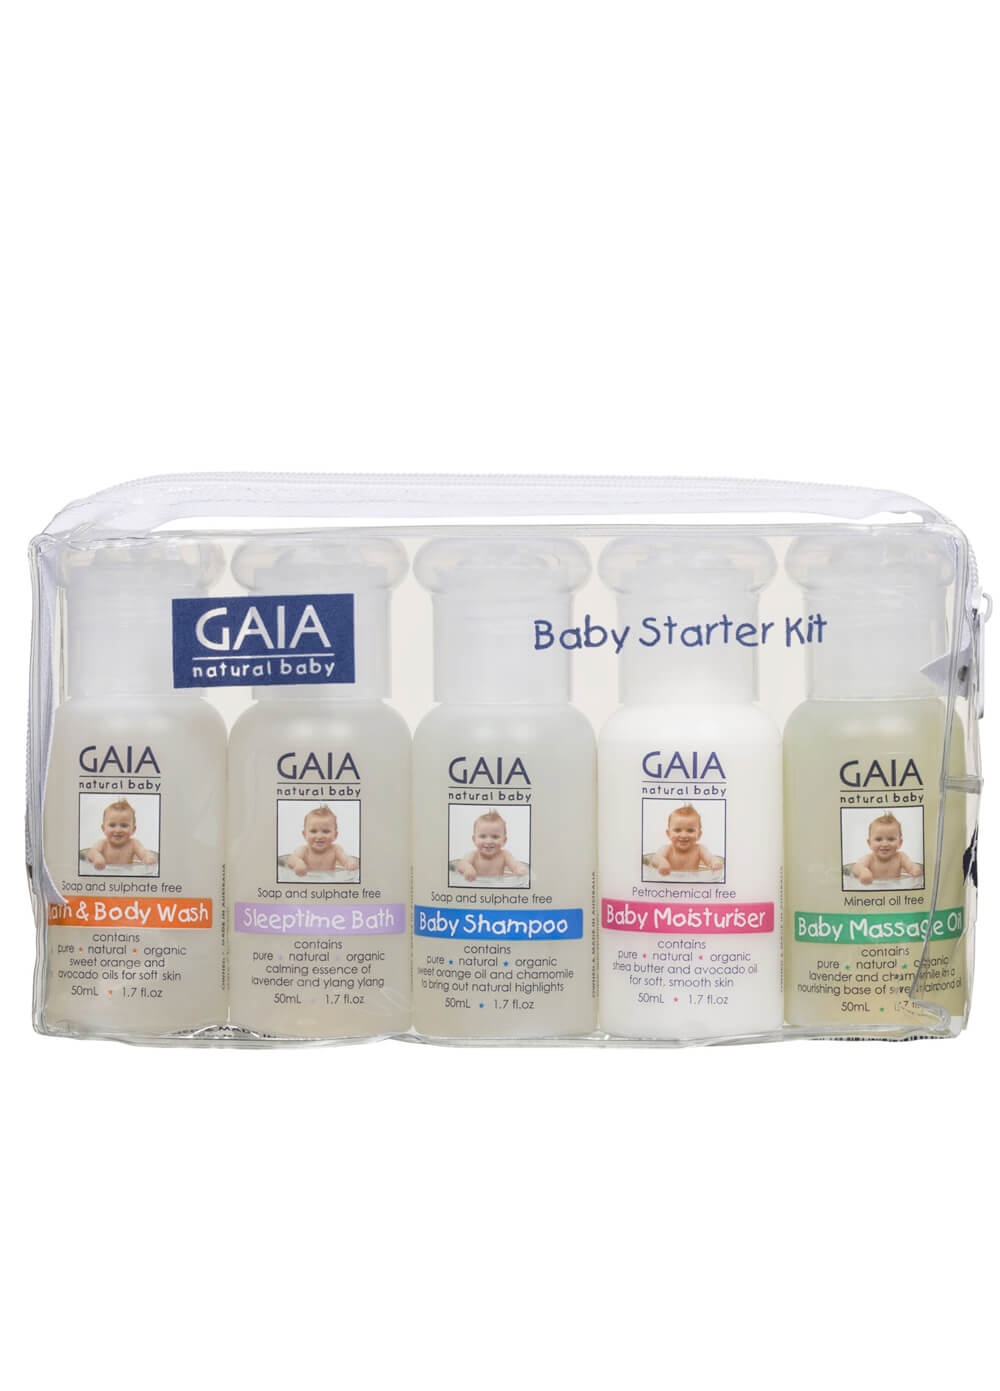 Queen Bee Natural Baby Starter Kit by GAIA Skin Naturals